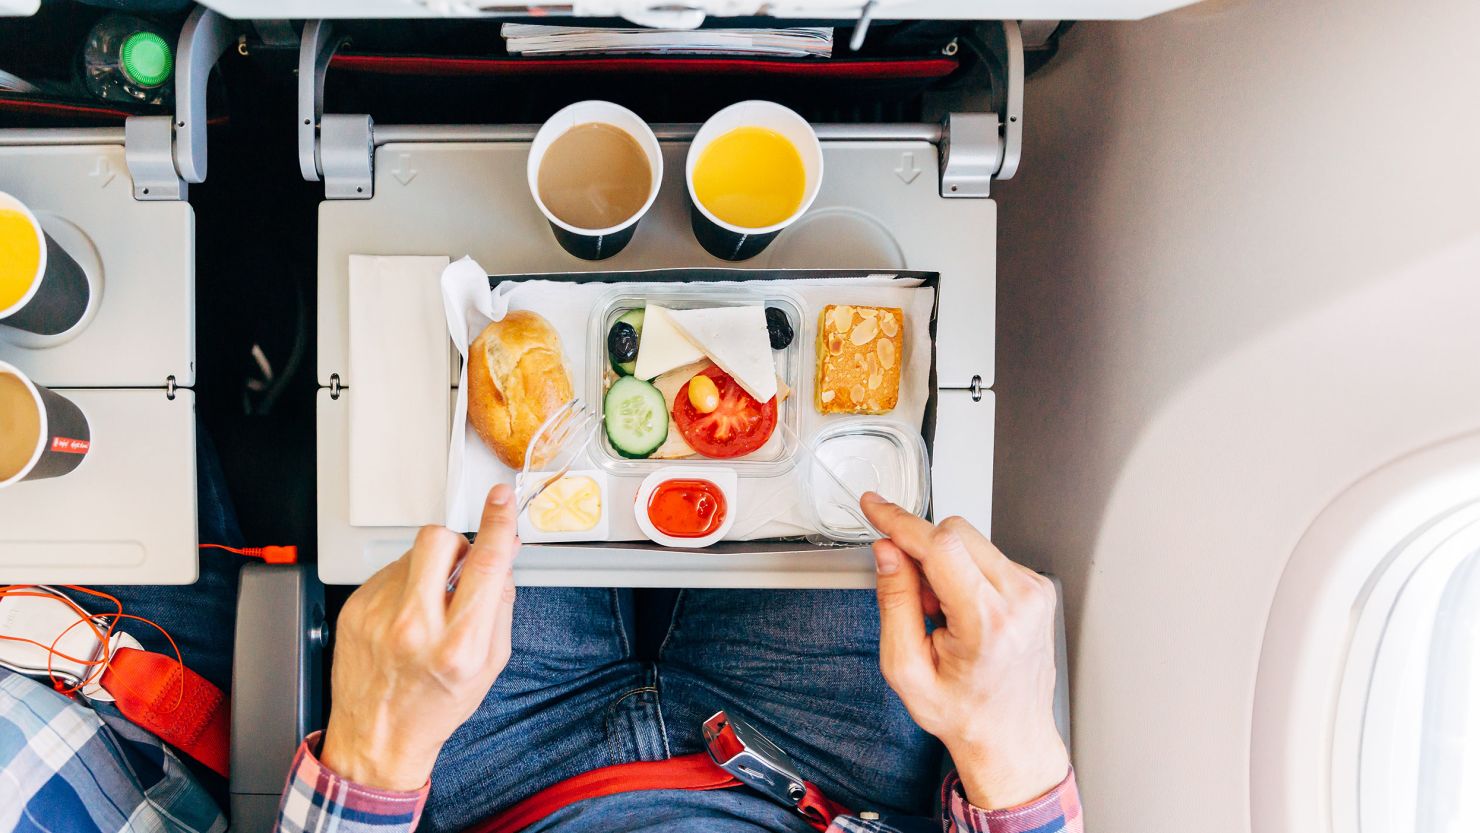 Not everyone wants to eat on a flight.